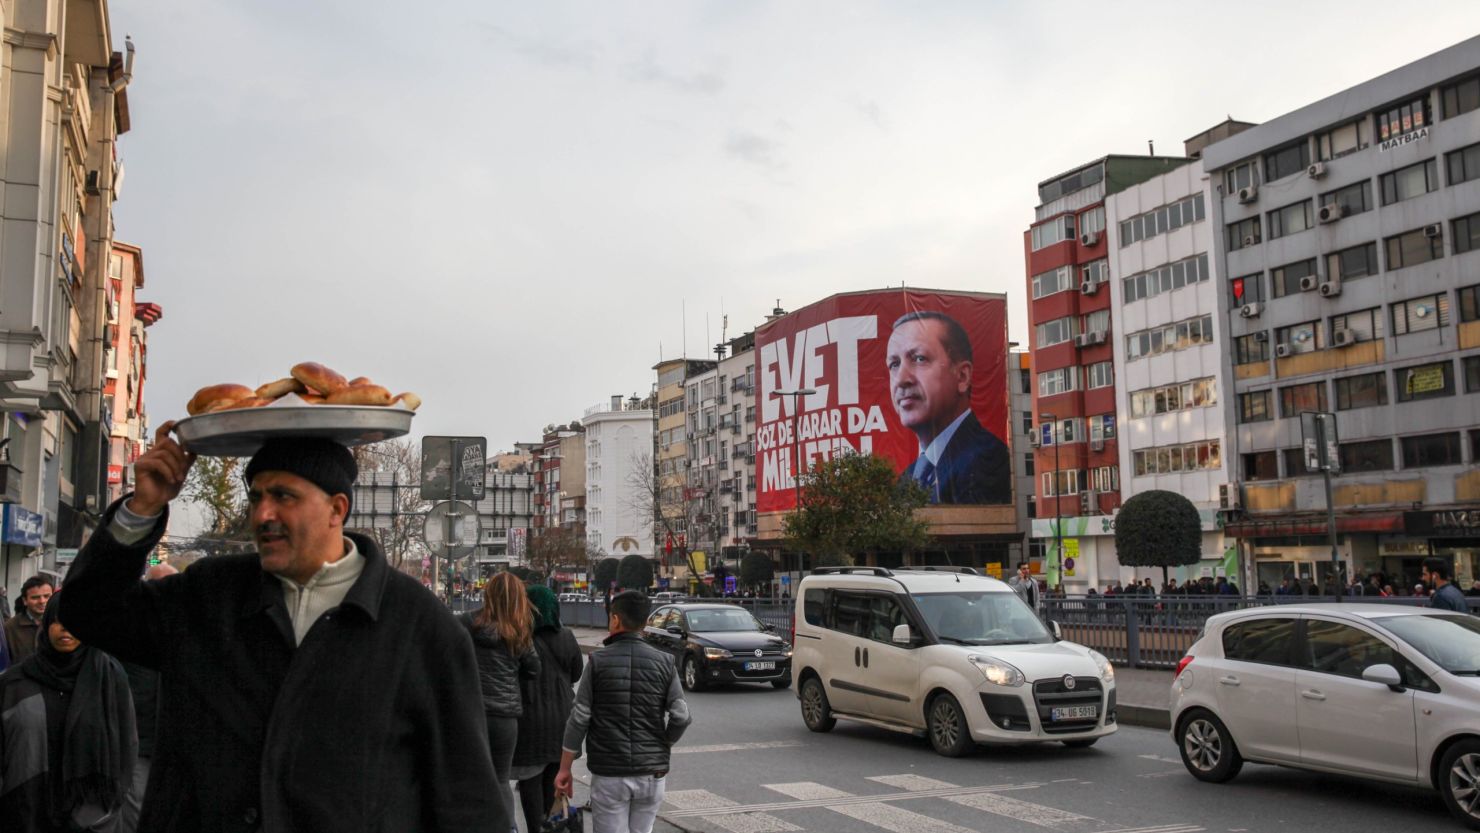 Istanbul residents walk past "Yes" campaign signs in the city center on Saturday, April 8, 2017.  President Tayyip Erdogan's "Yes" campaign slogan reads: "Yes. The people have the freedom to speak and decide." Large banners reading "Evet," or "Yes" can be seen on virtually every corner of the city. 